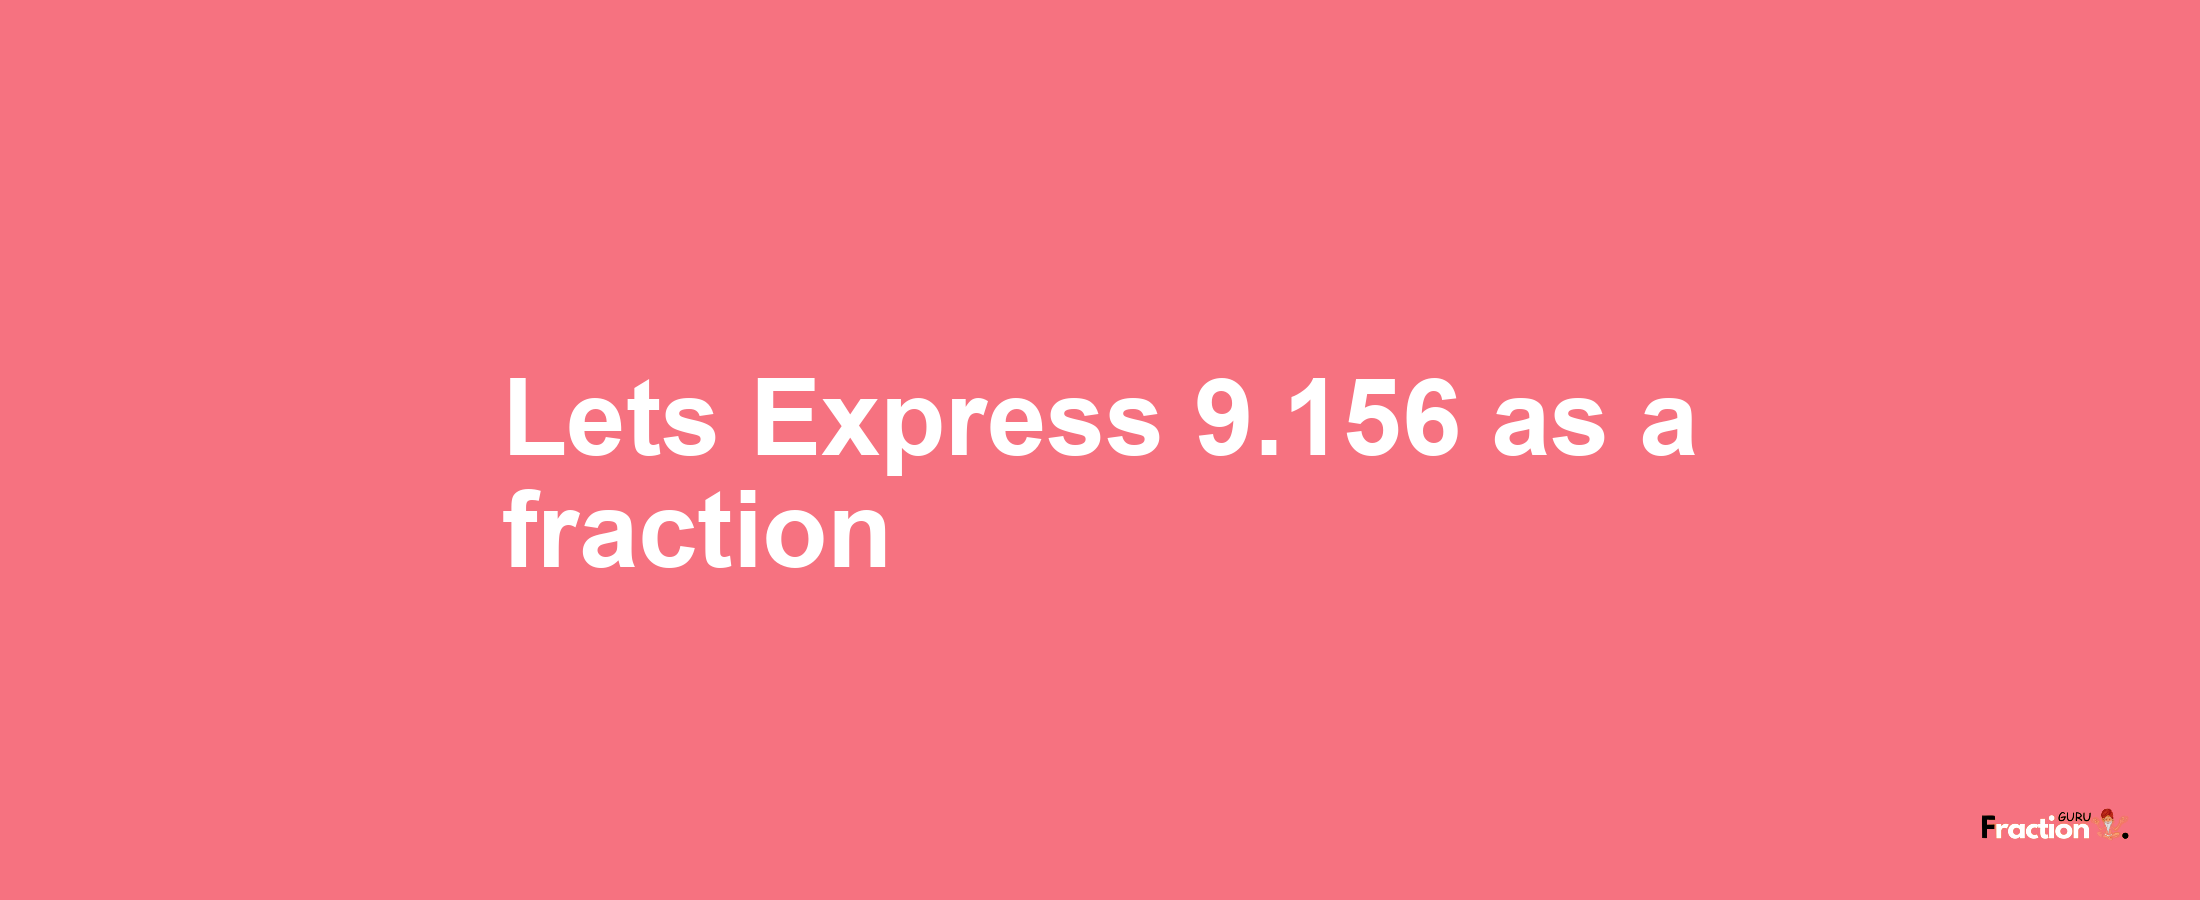 Lets Express 9.156 as afraction